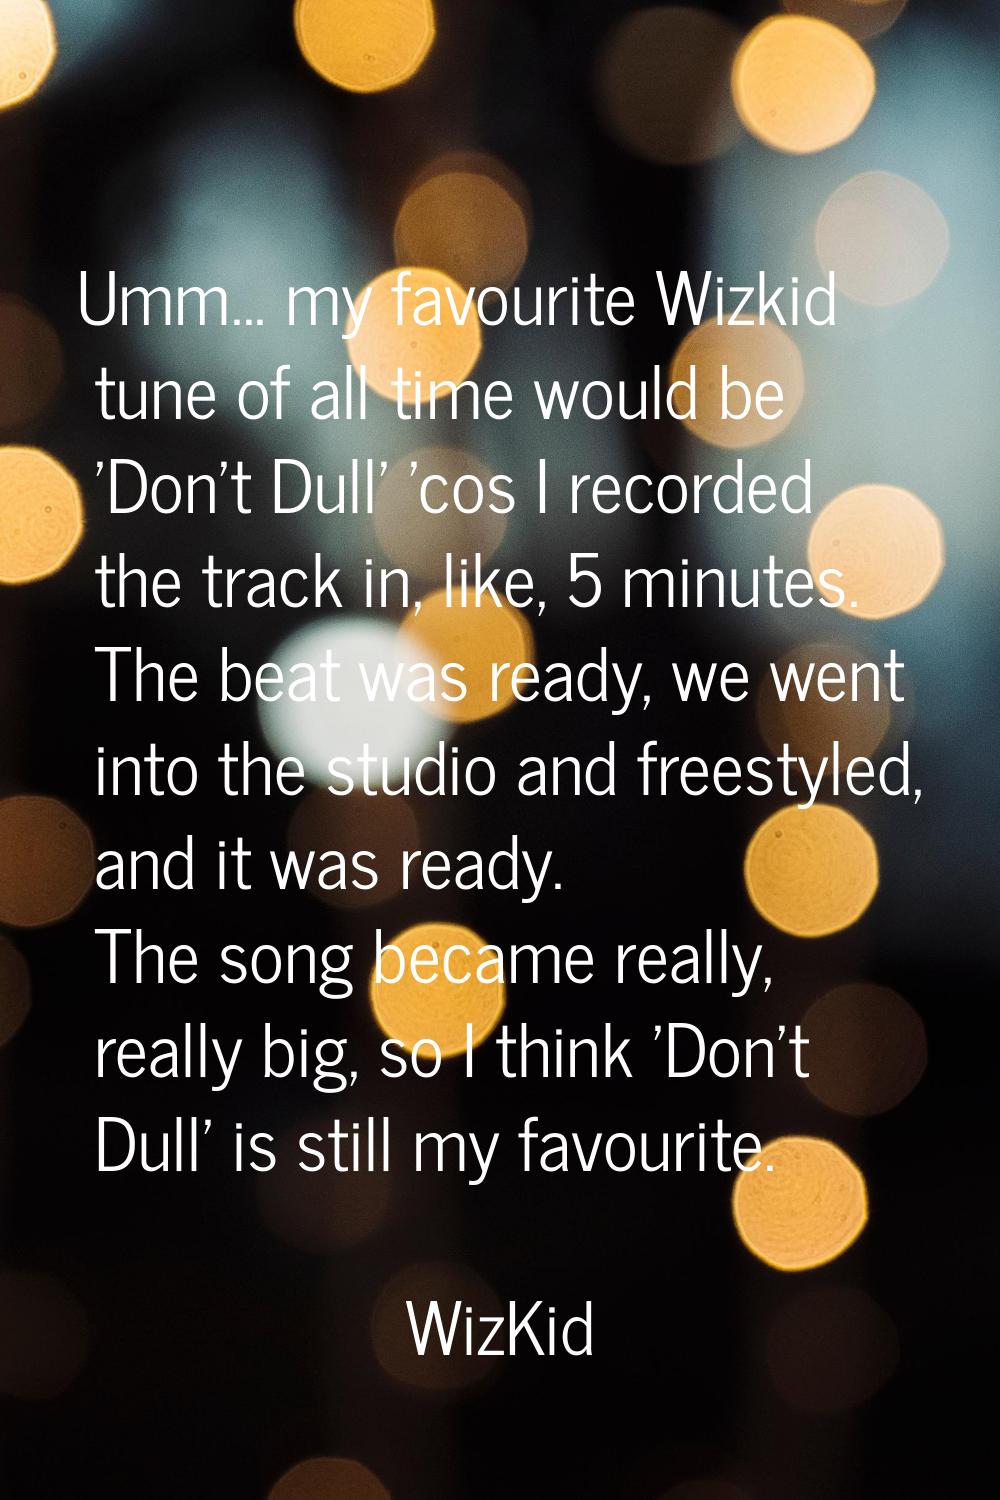 Umm... my favourite Wizkid tune of all time would be 'Don't Dull' 'cos I recorded the track in, lik